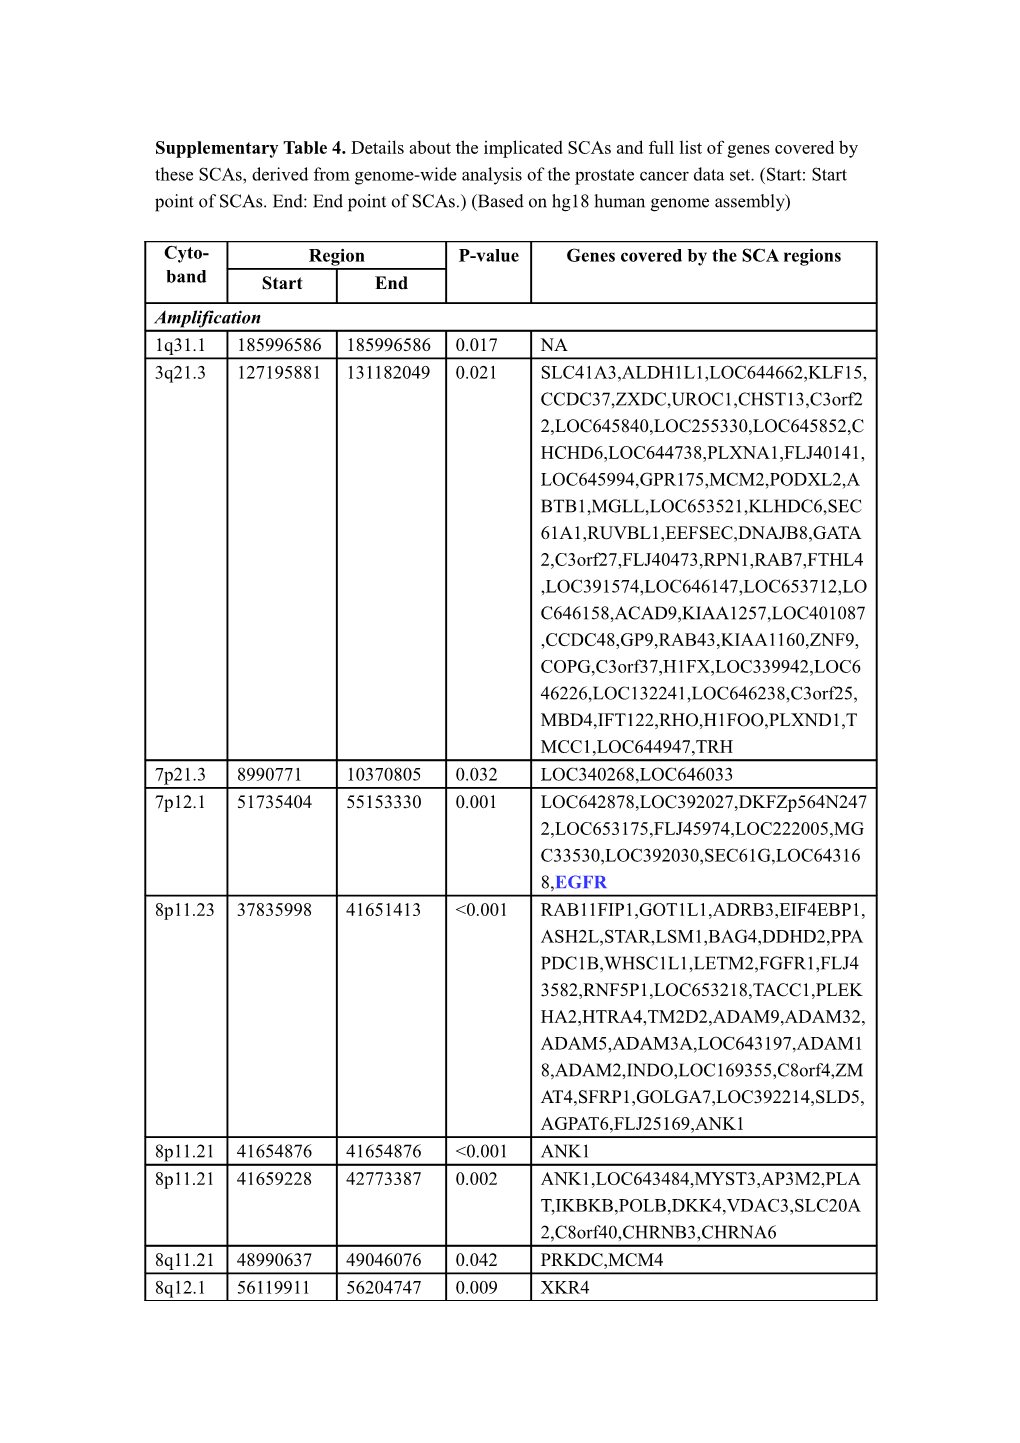 Supplementary Table 4. Details About the Implicated Scas and Full List of Genes Covered